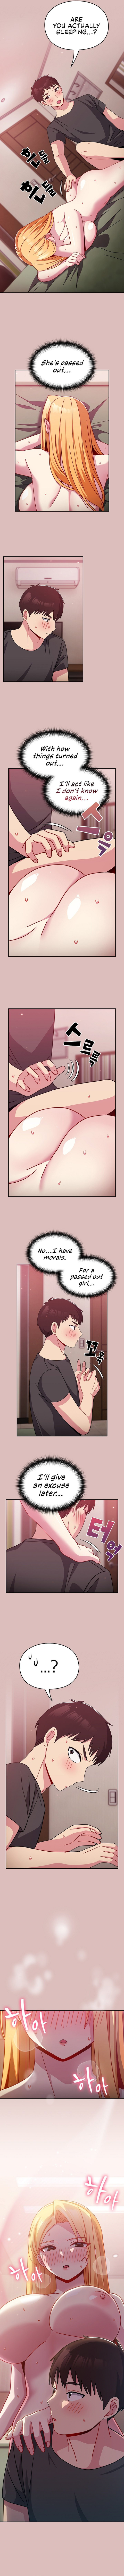 when-did-we-start-dating-chap-38-5